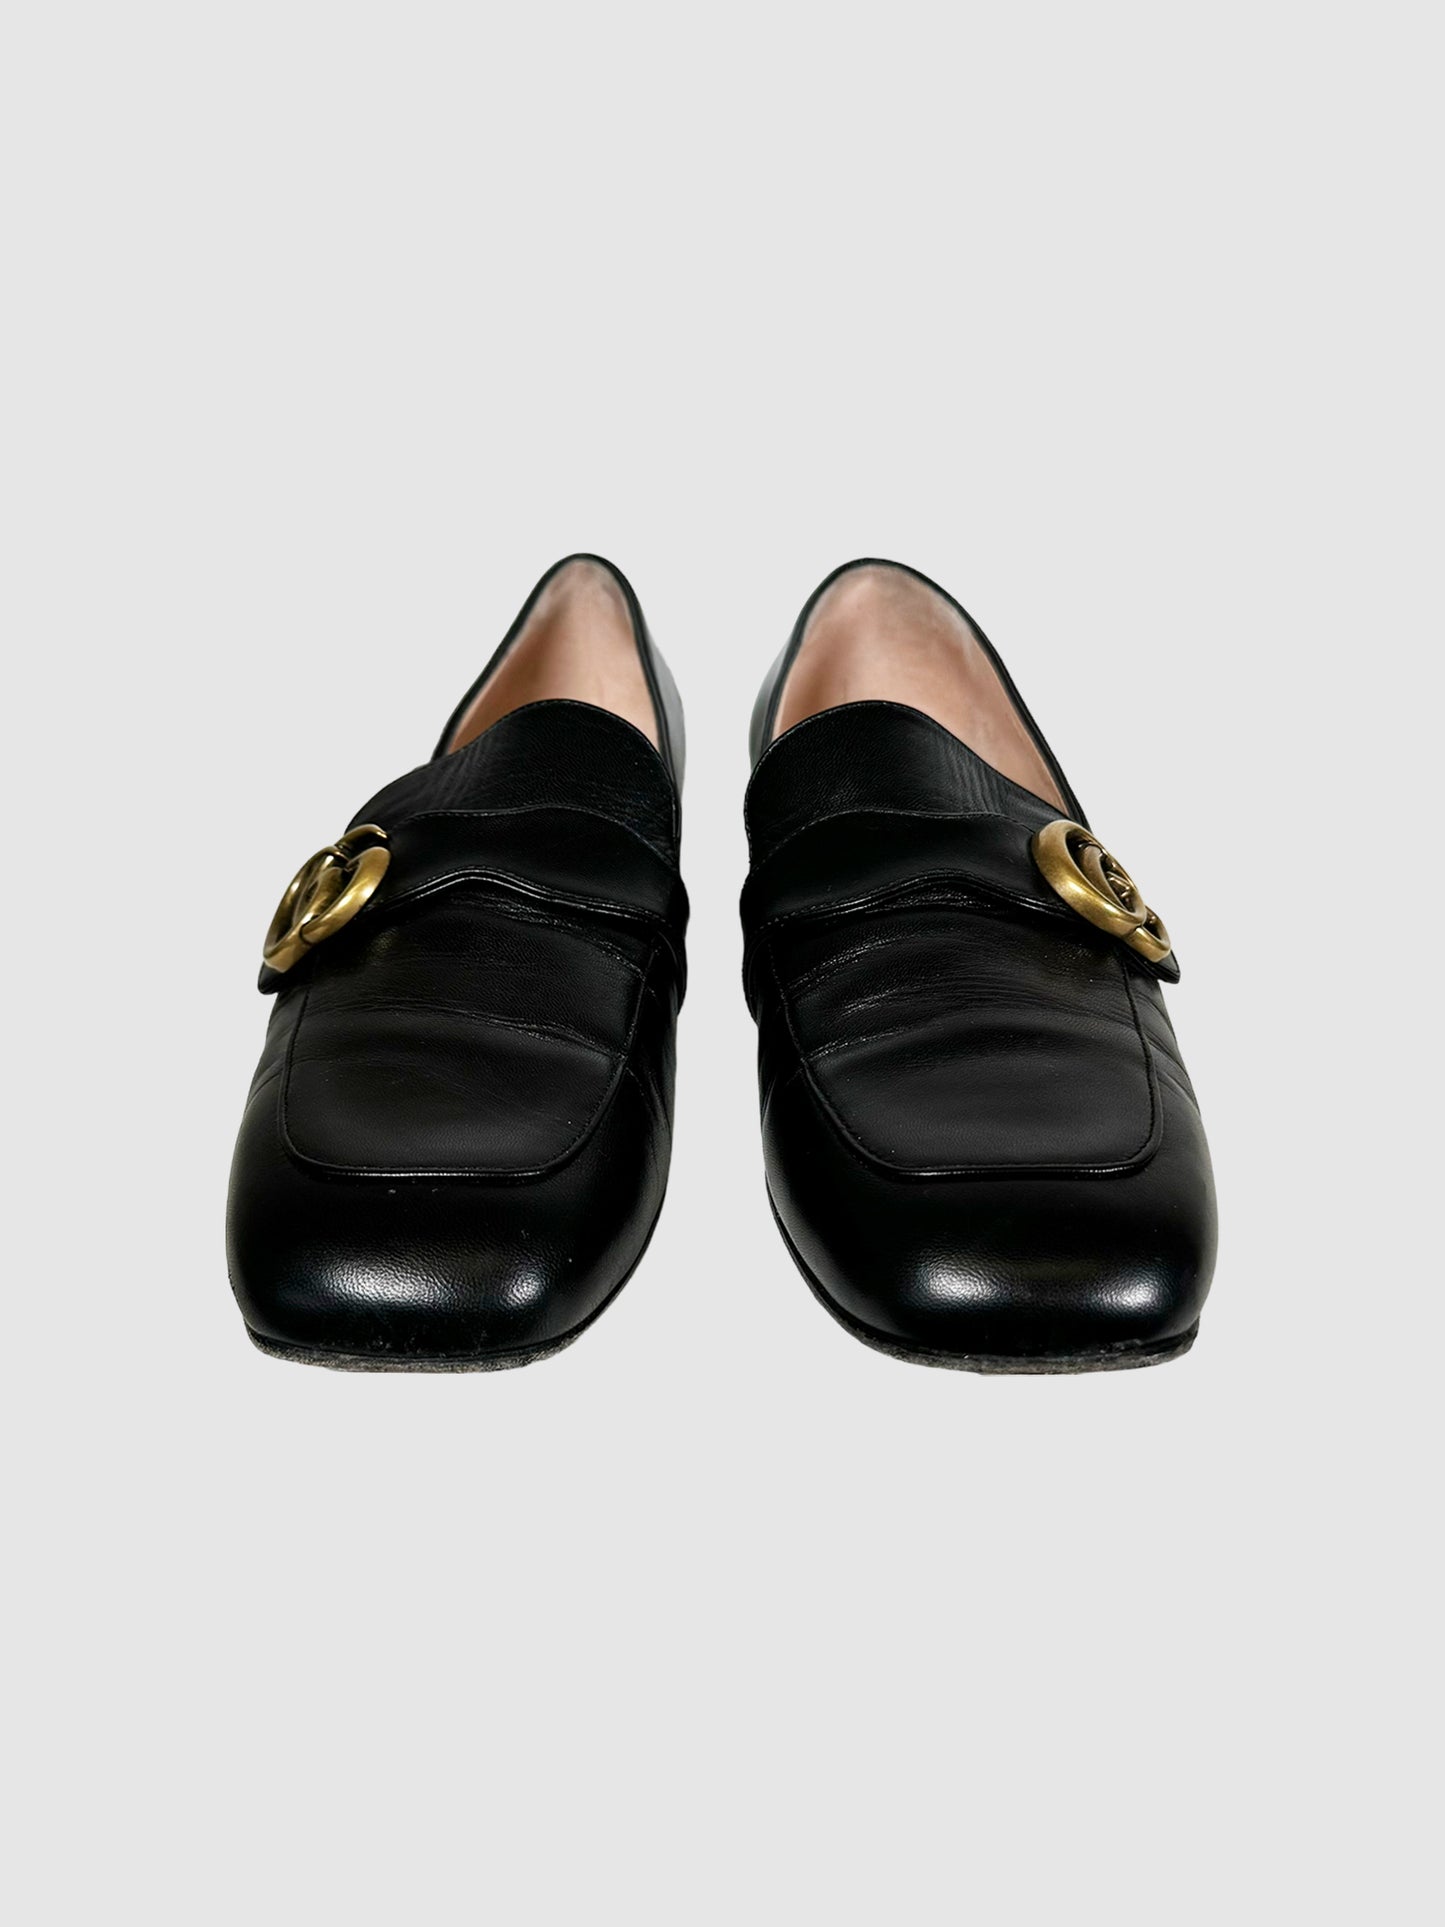 Double G Leather Loafers - Size 42